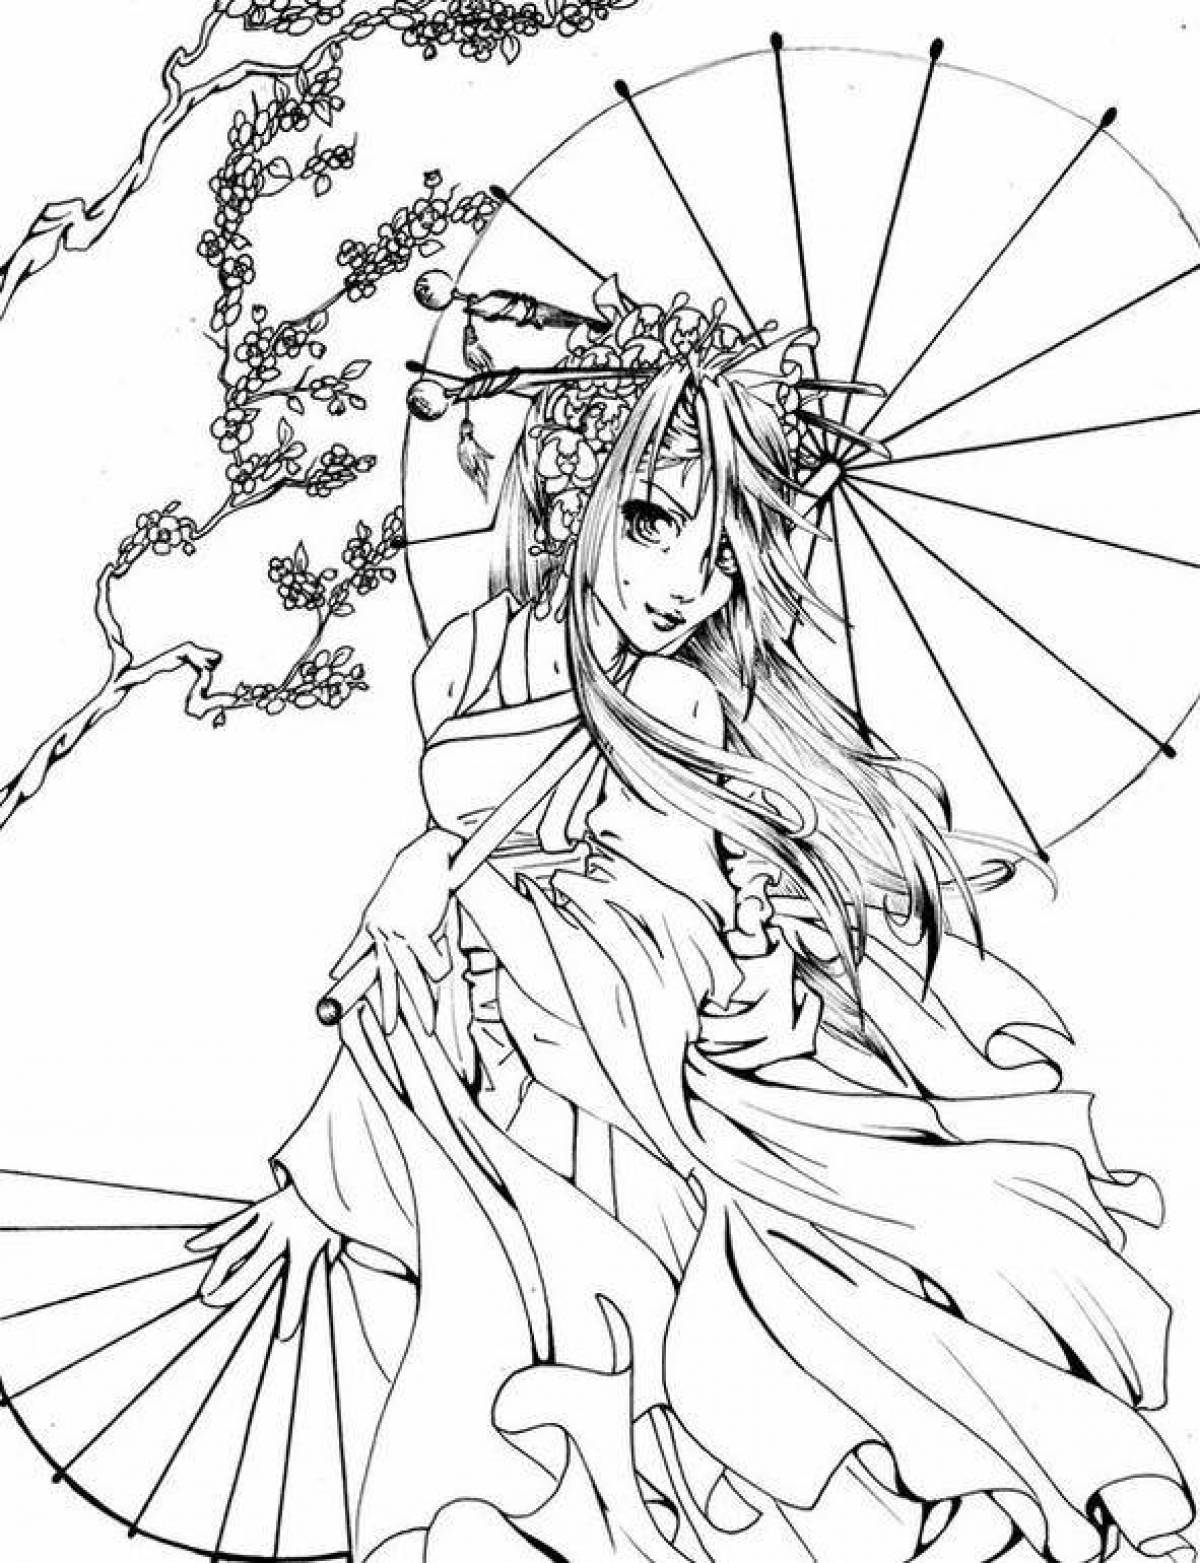 Exciting anime anti-stress coloring book